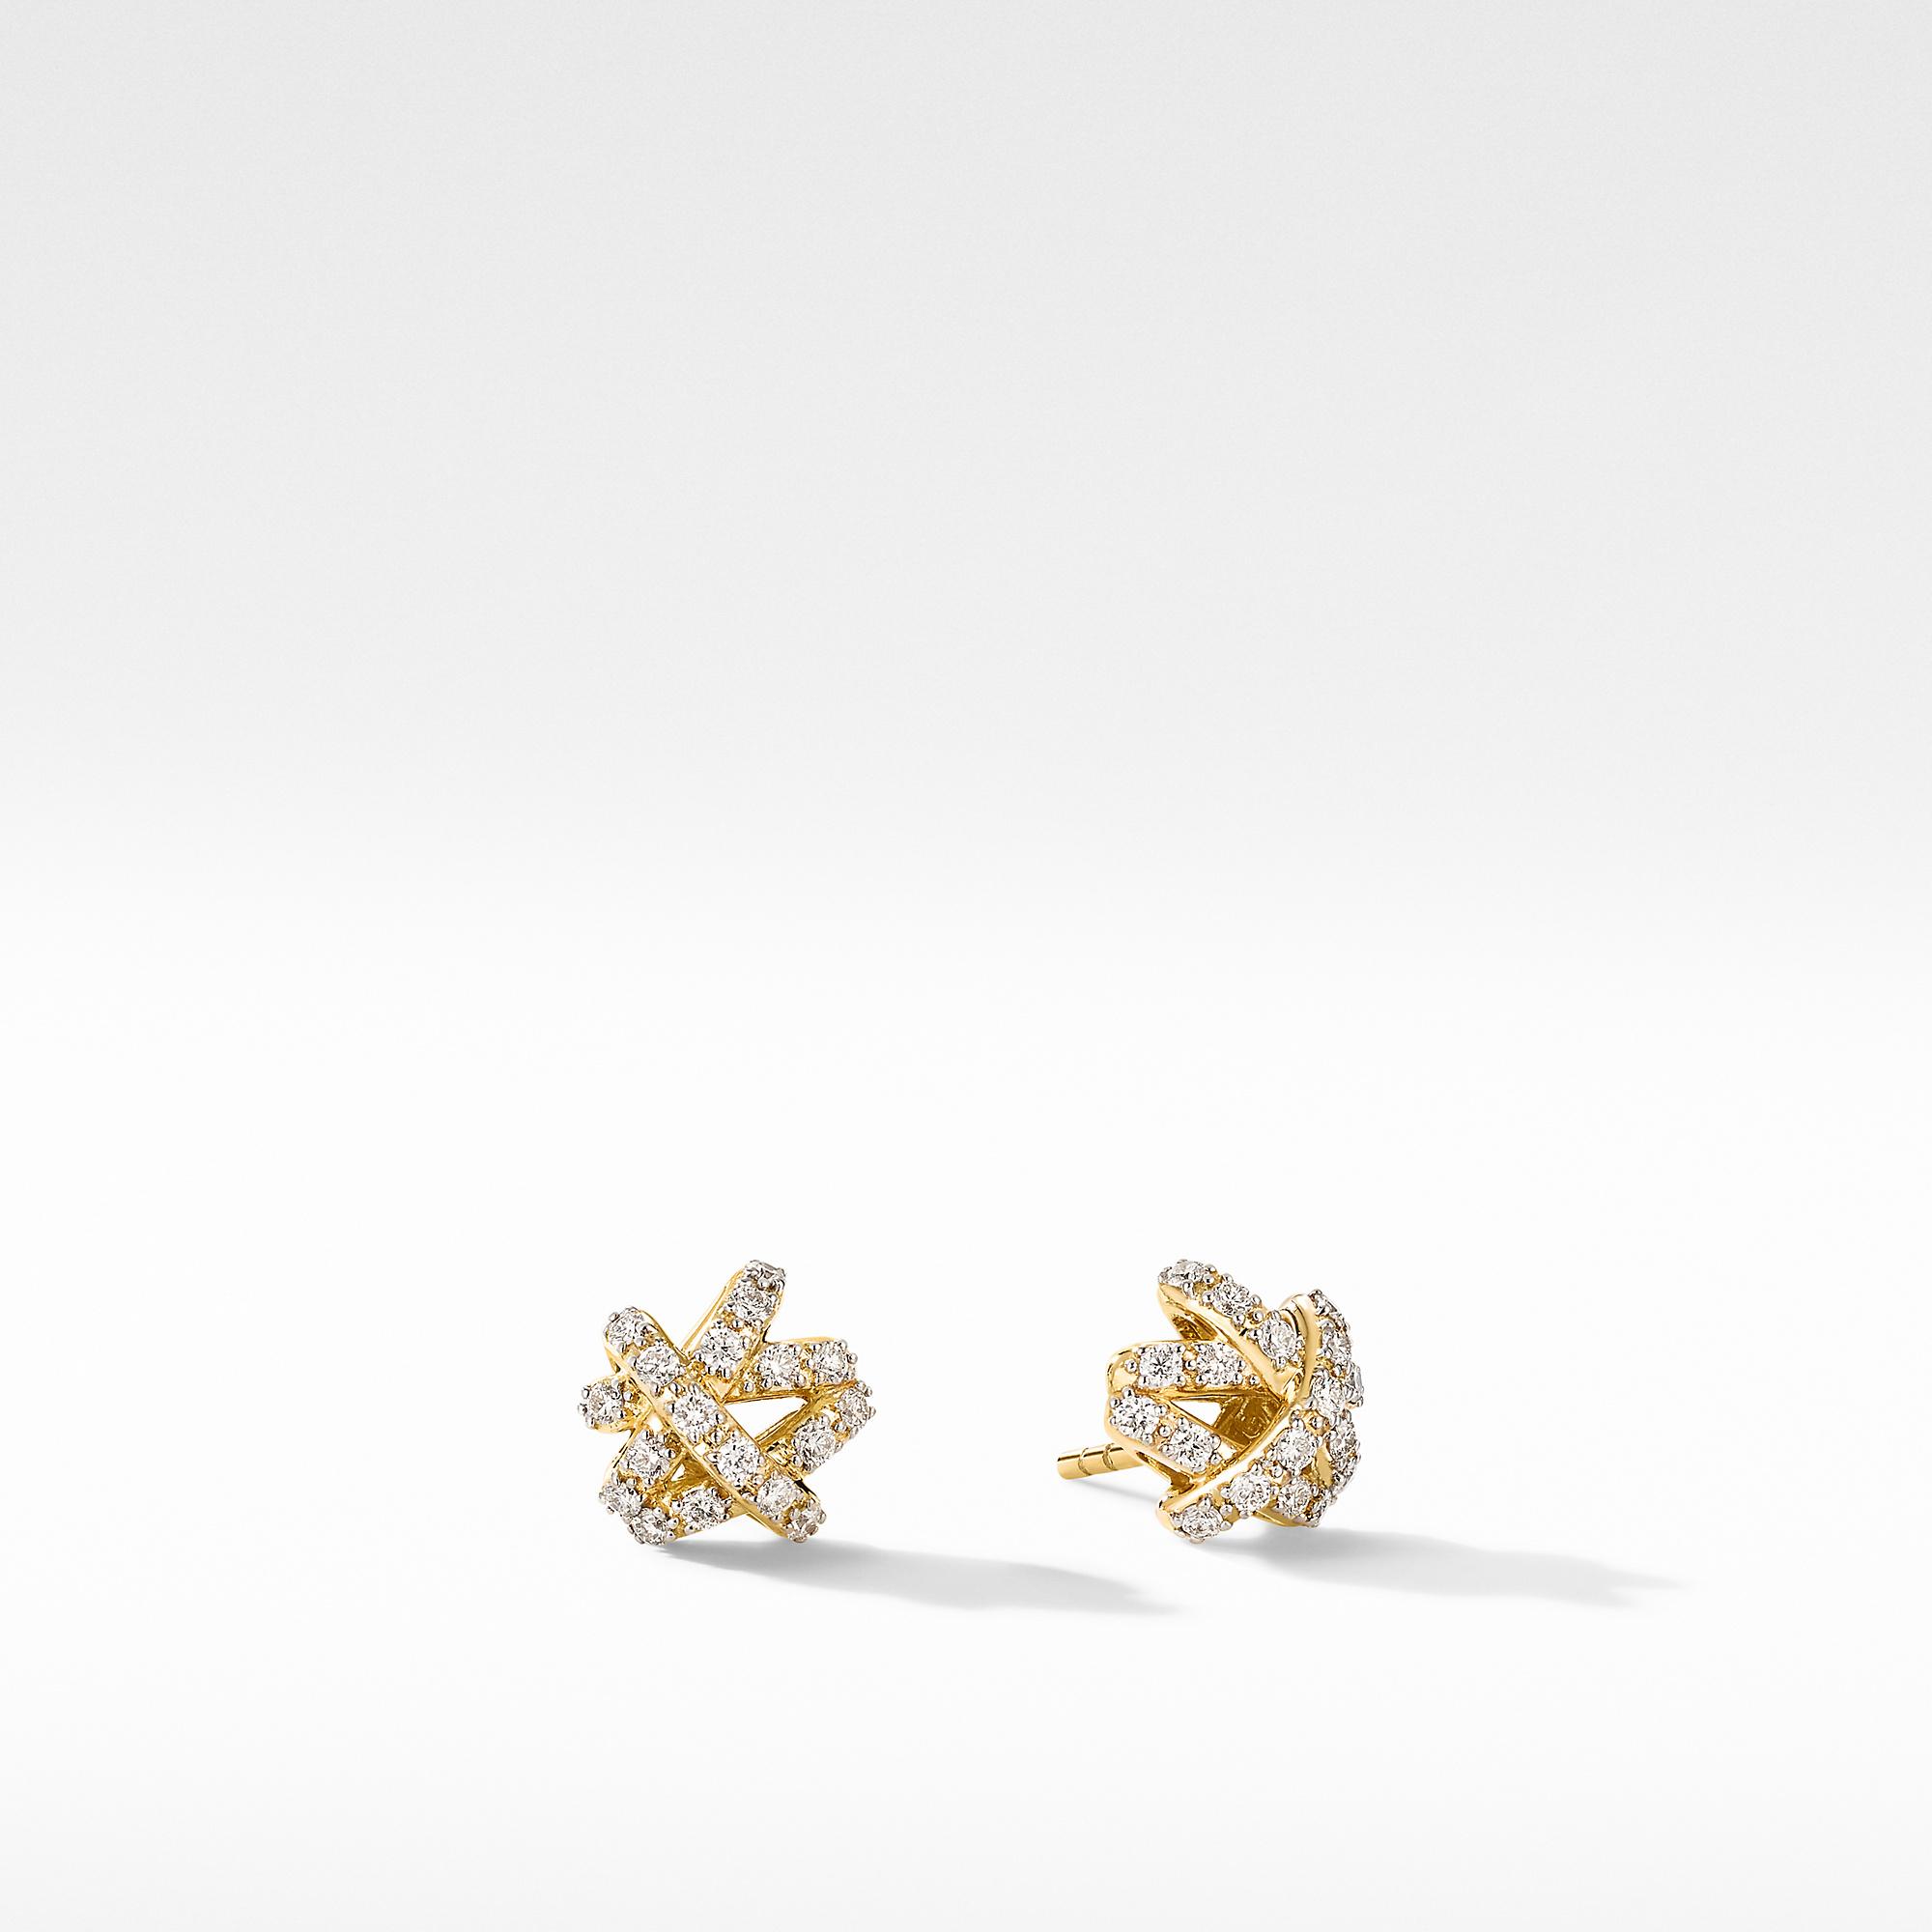 David Yurman The Crossover Collection Stud Earrings in 18K Yellow Gold with Full Pave diamonds